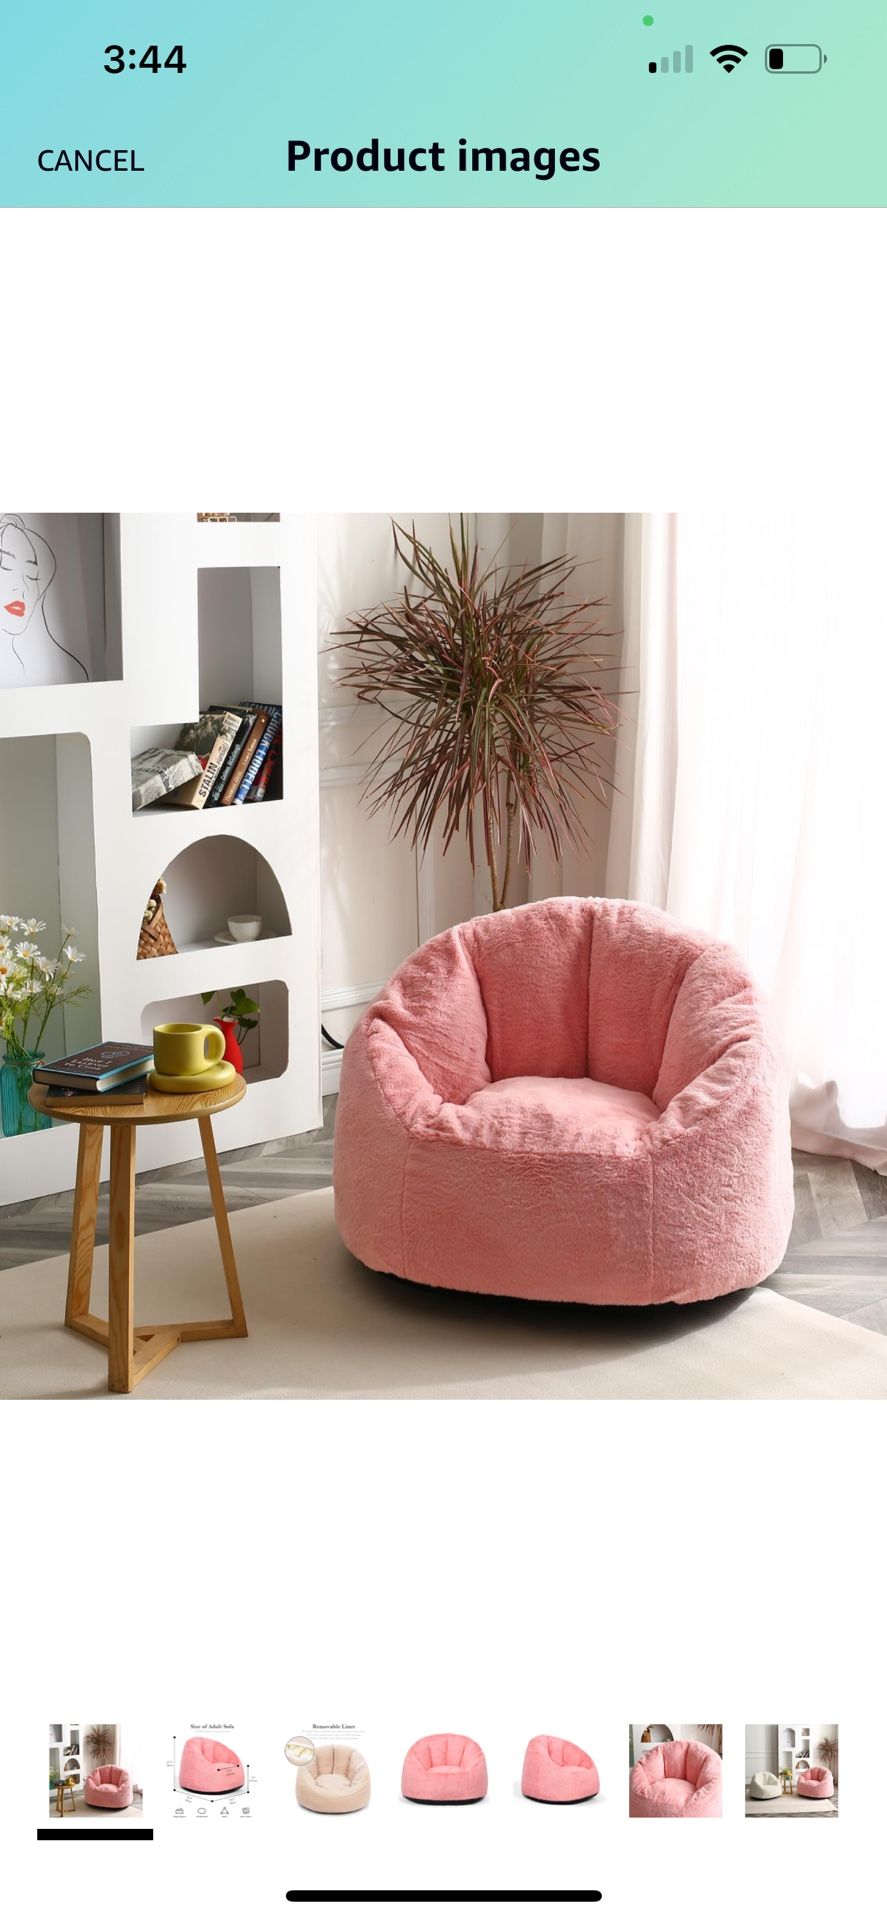 N&V Medium Shell Bean Bag Chair, Adult Size Bean Bag Sack, Foam Filling, Includes Removable and Machine Washable Cover, 37in, Soft Faux Fur, Pink